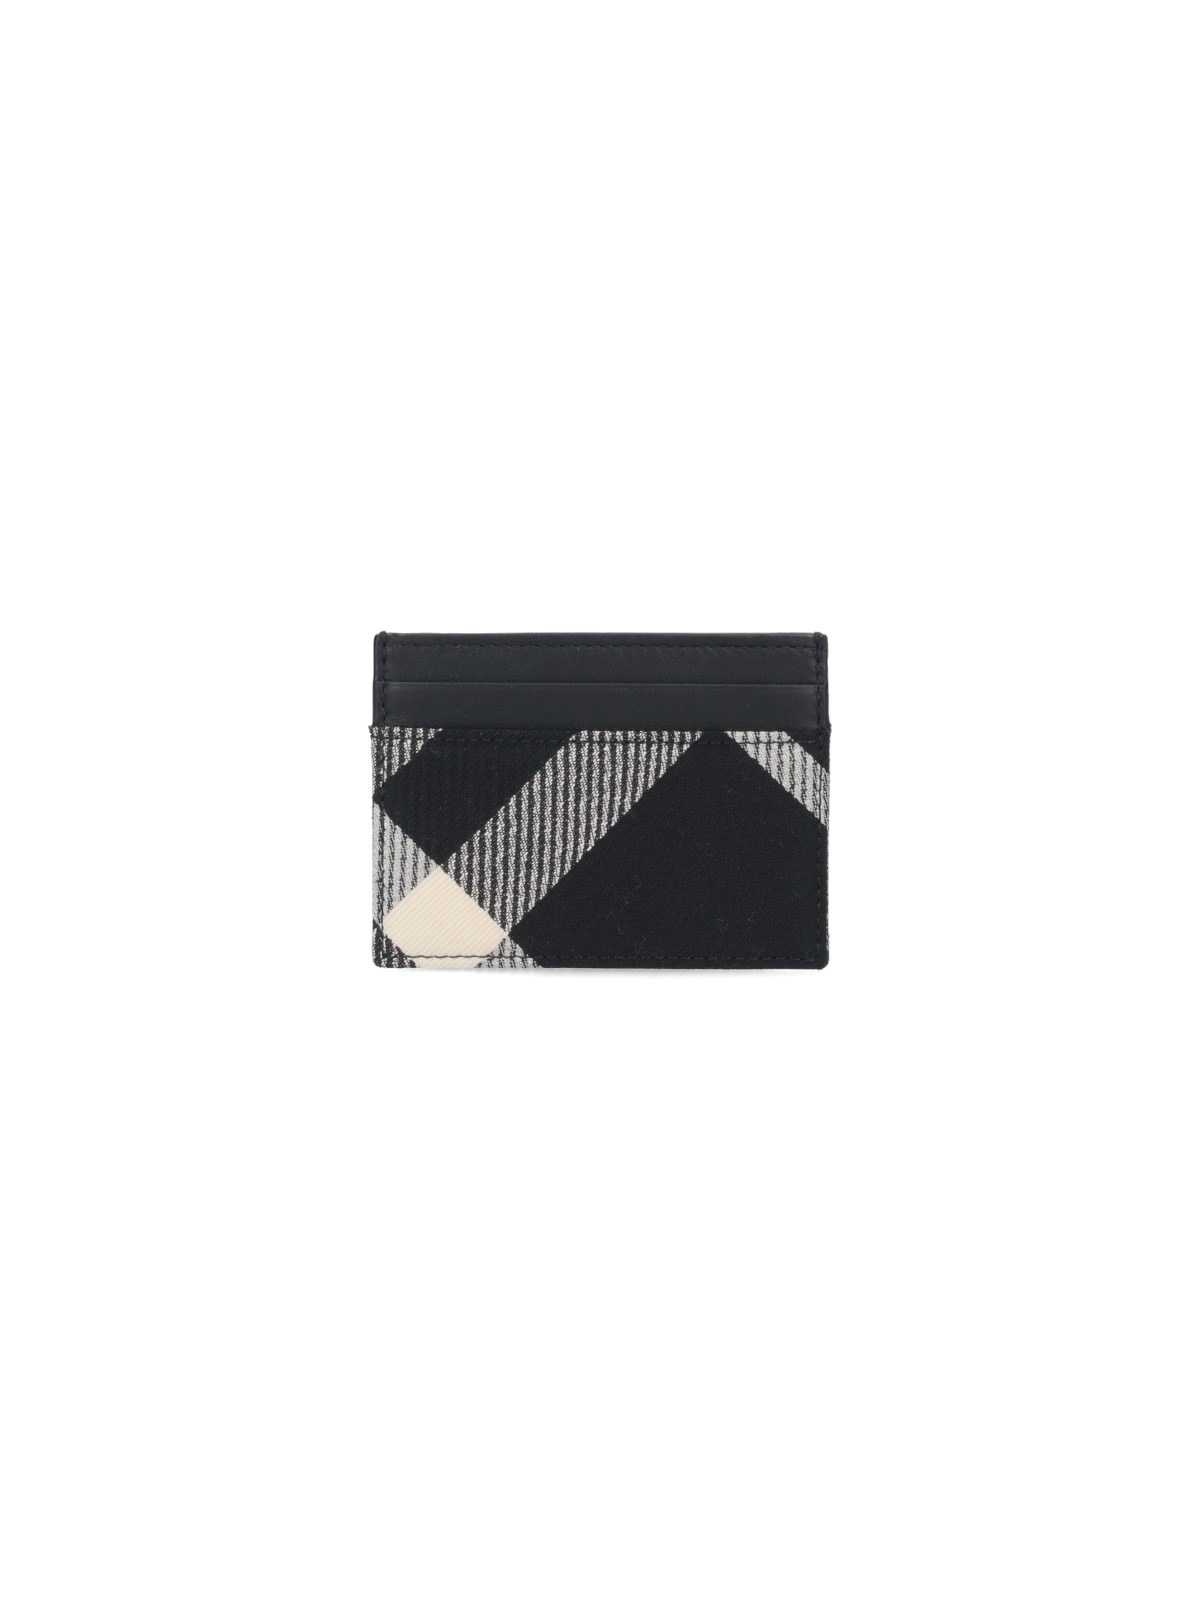 Burberry Check Card Holder In Black  